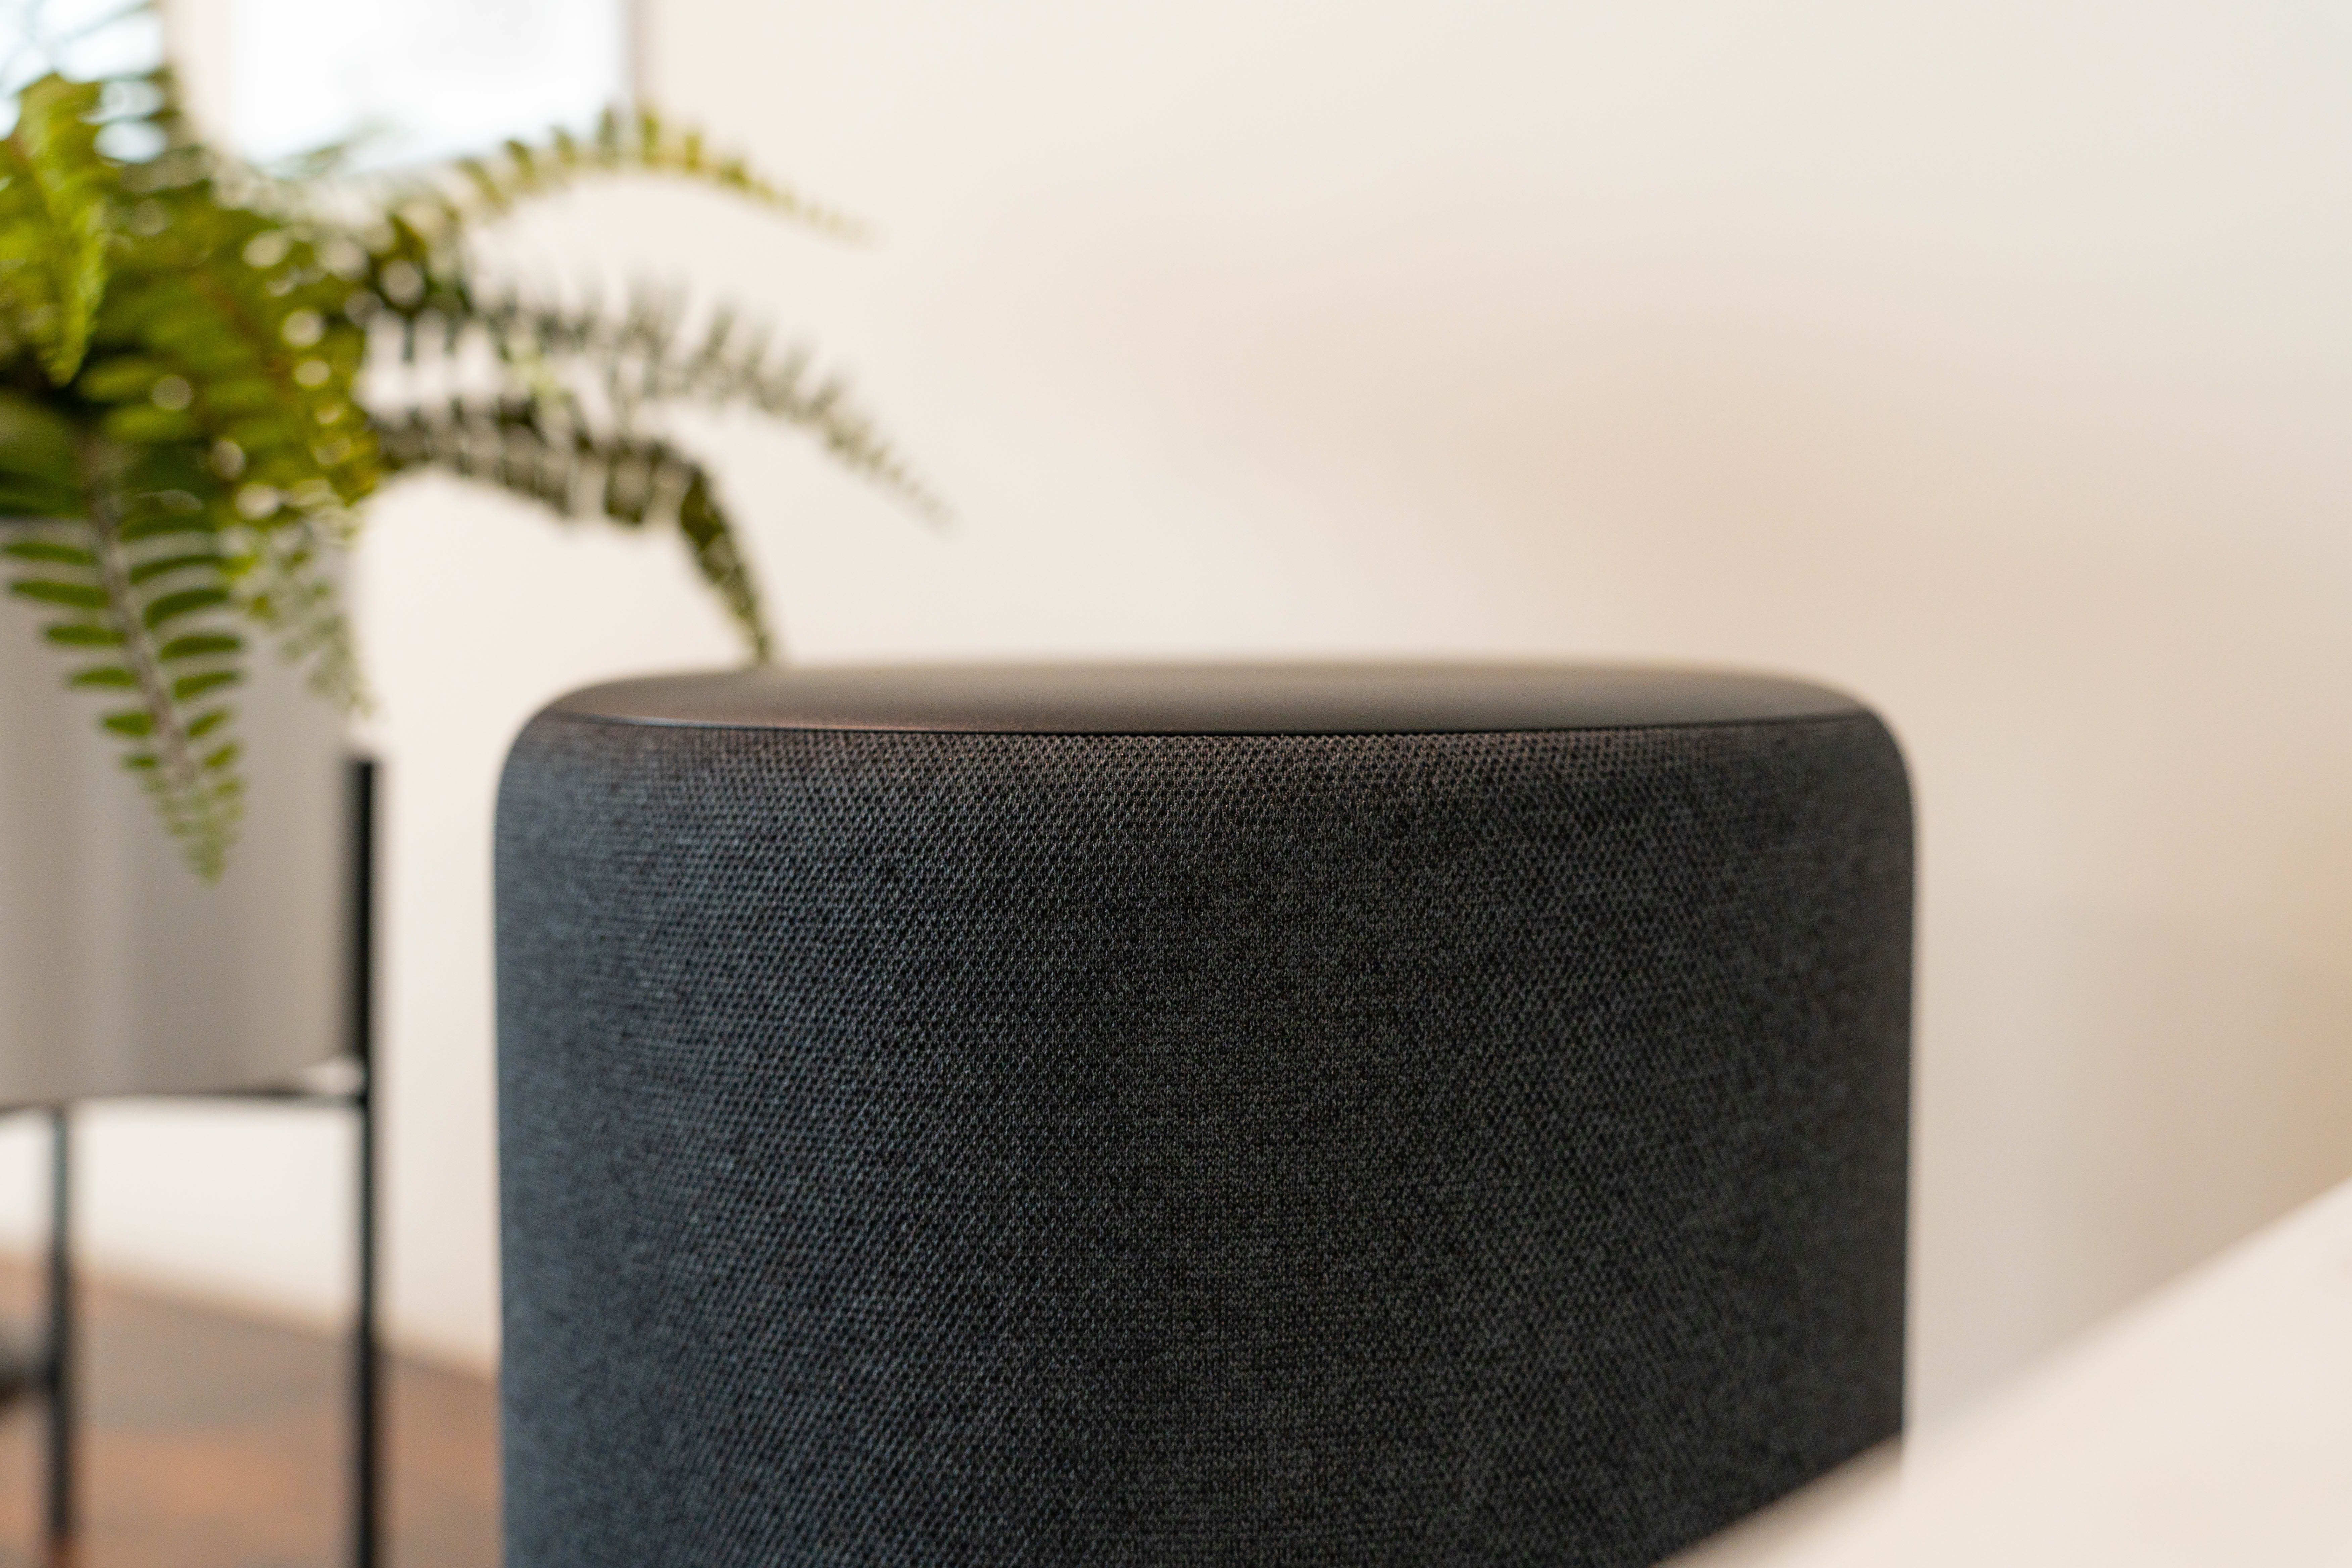 Meet Echo Sub - Powerful subwoofer for our Echo - requires compatible Echo  device 